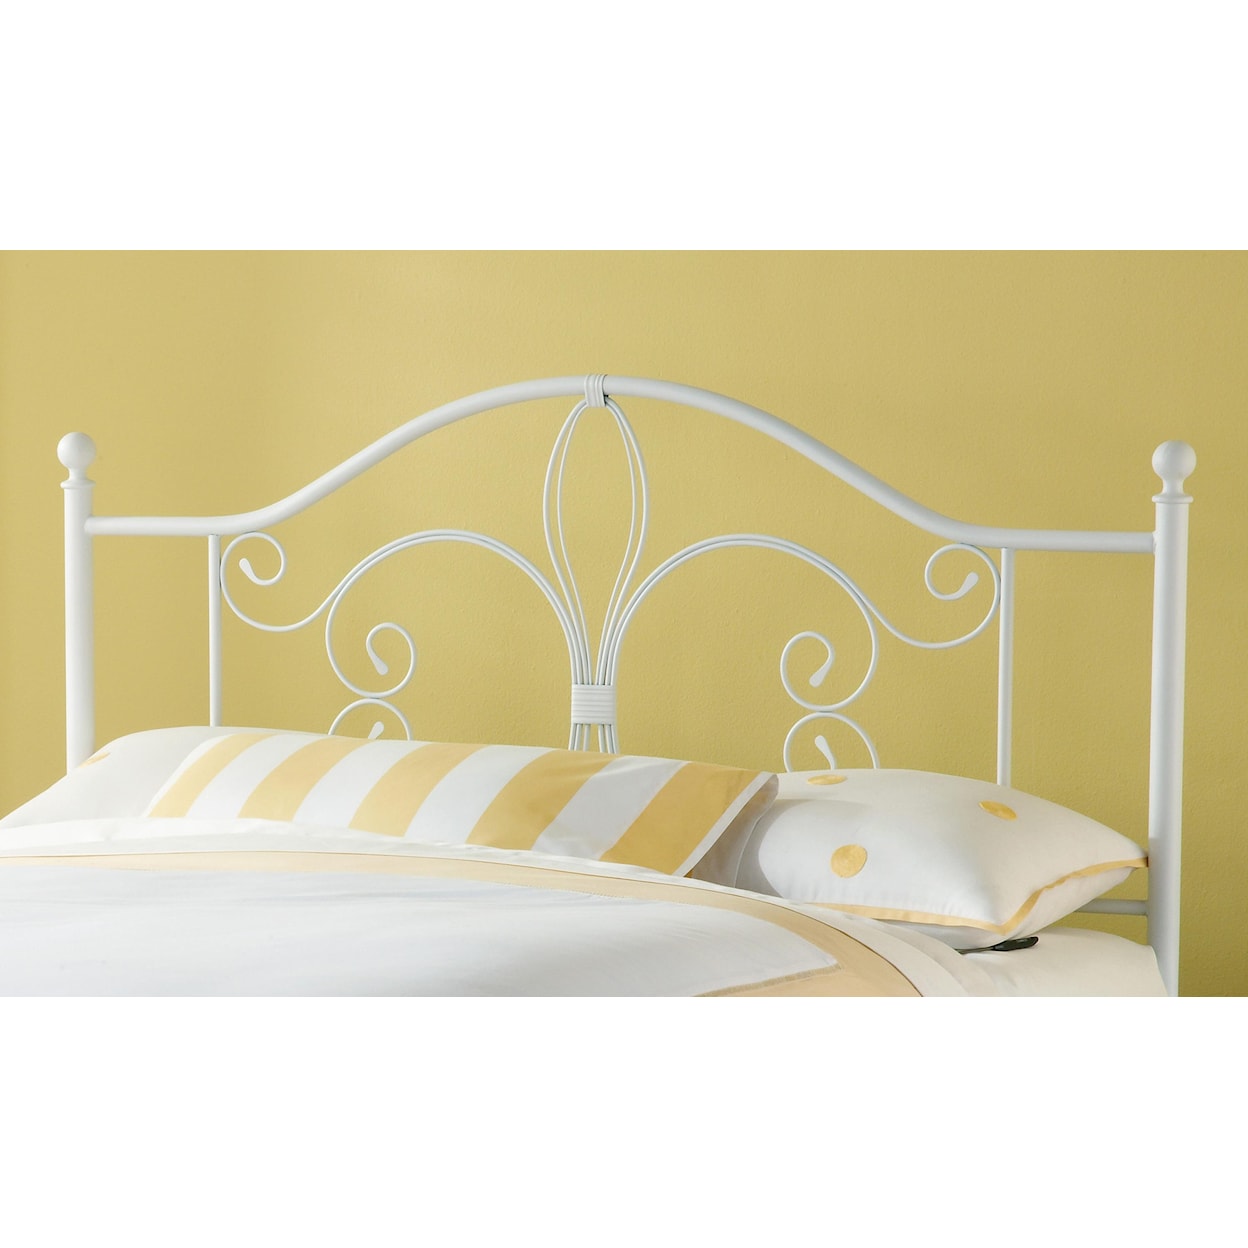 Hillsdale Metal Beds Ruby Duo Panel King Bed